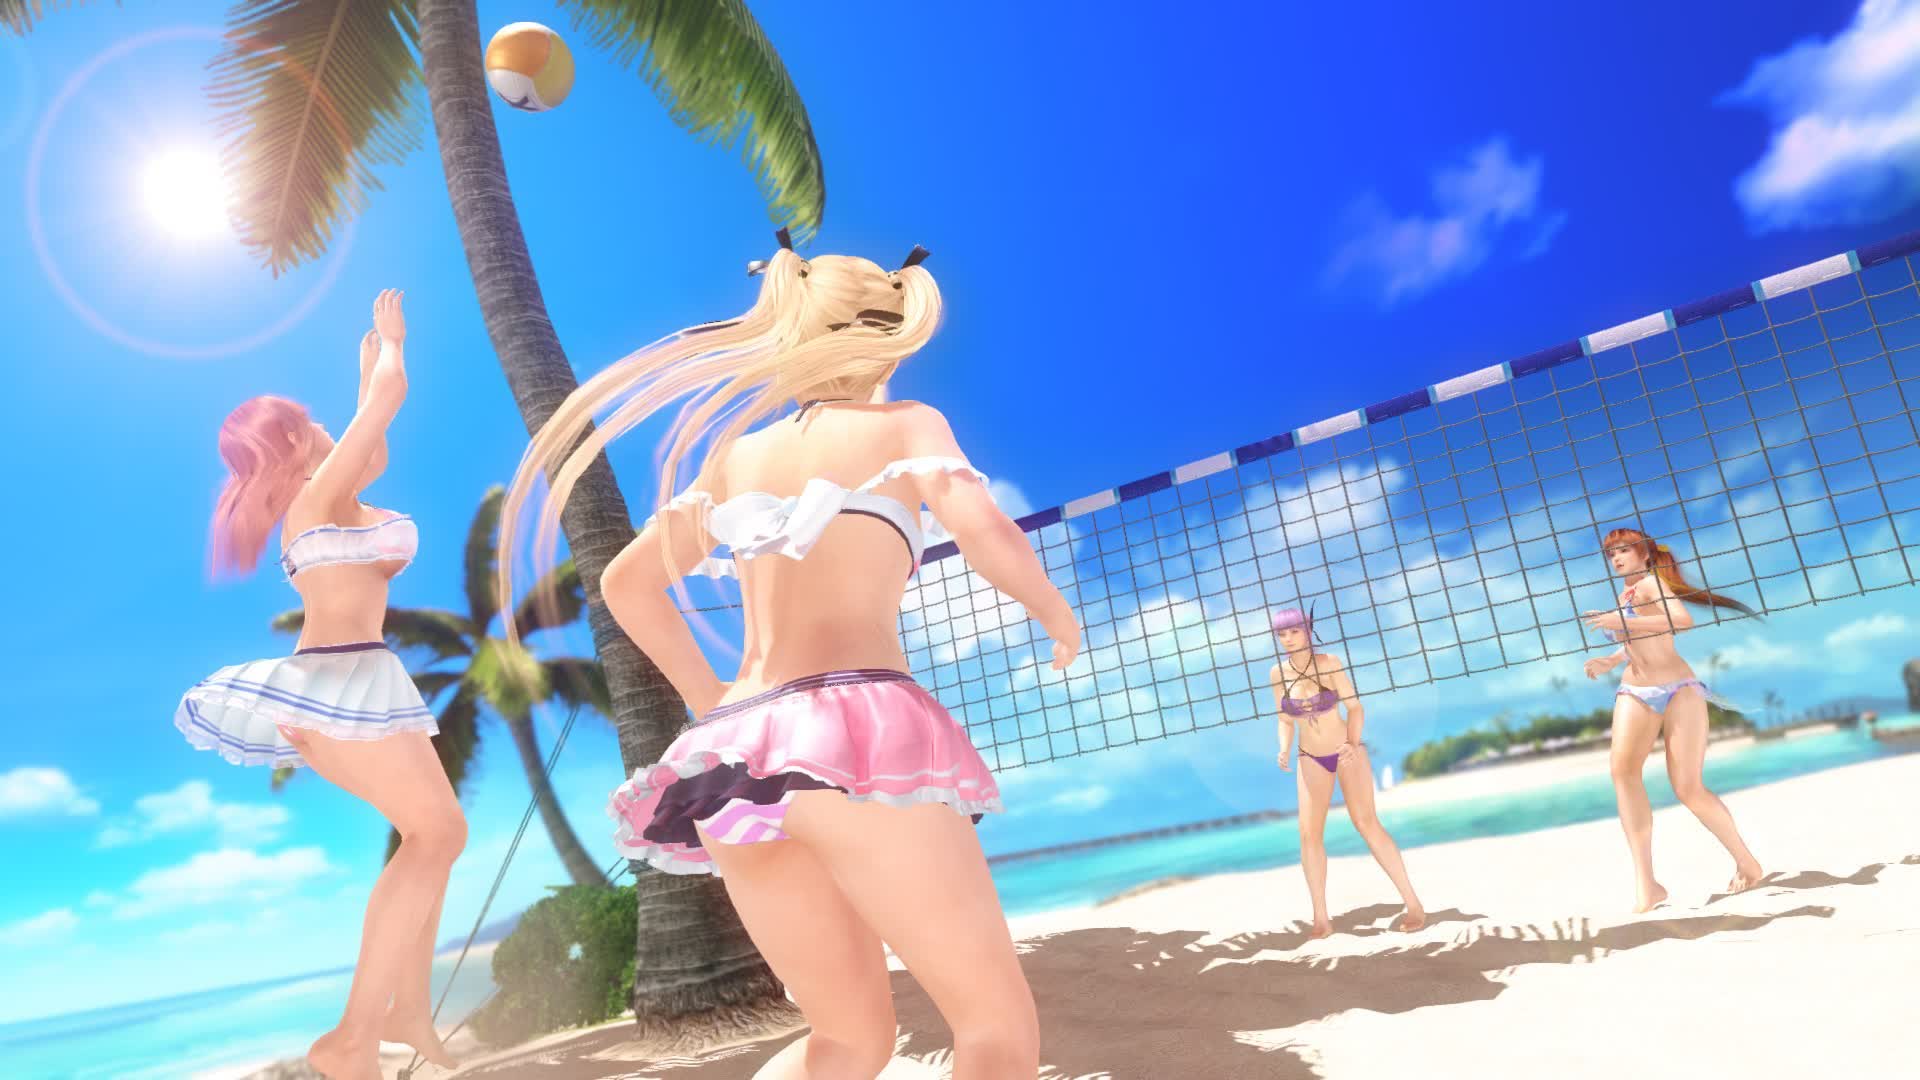 Dead Or Alive Nude Volleyball